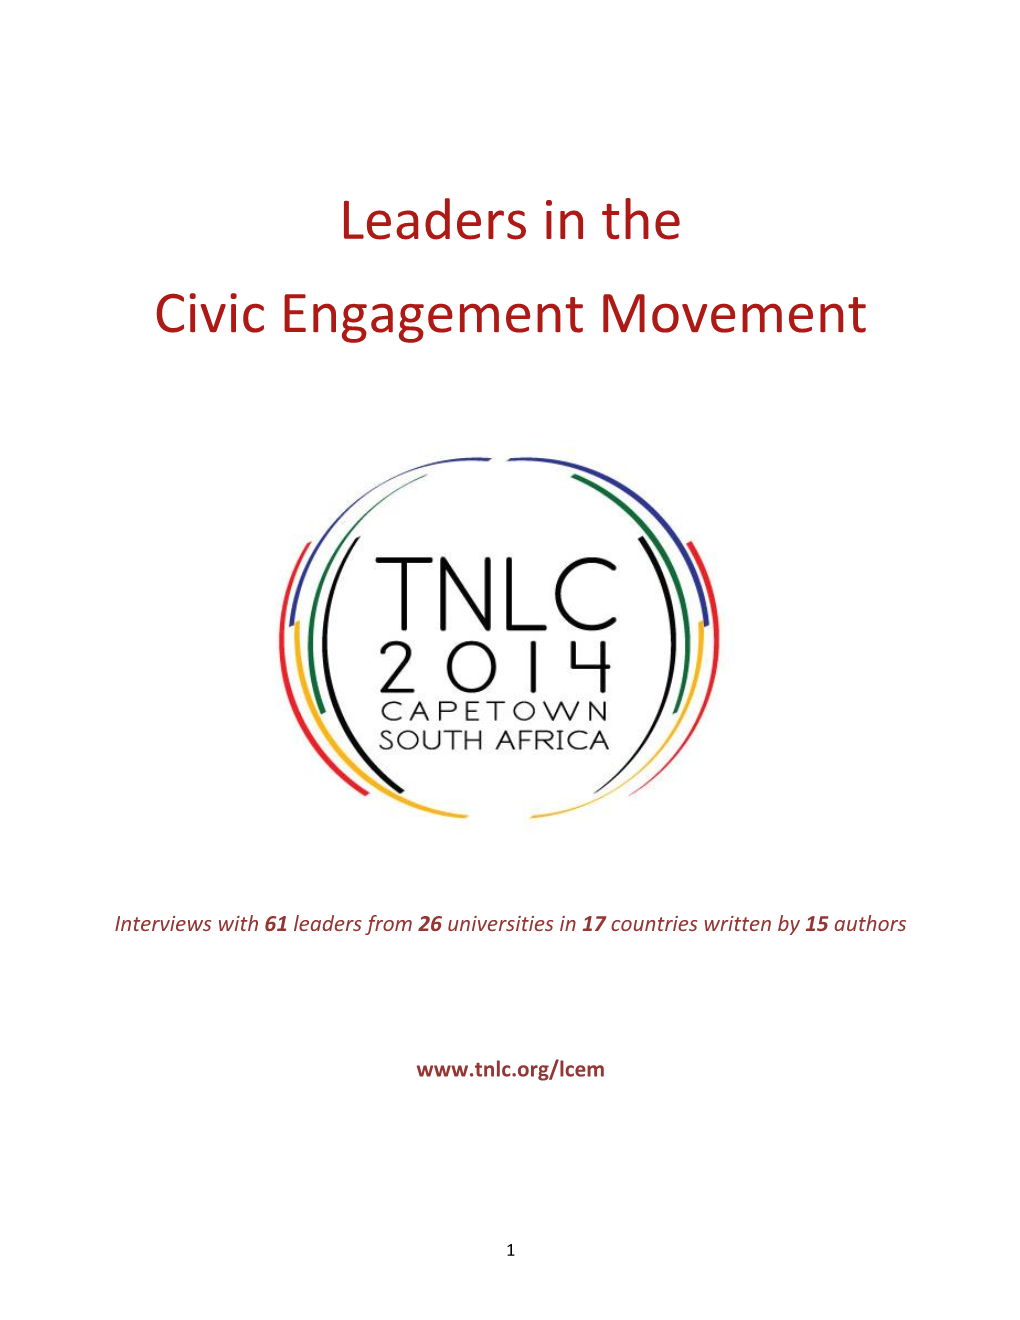 Leaders in the Civic Engagement Movement Series